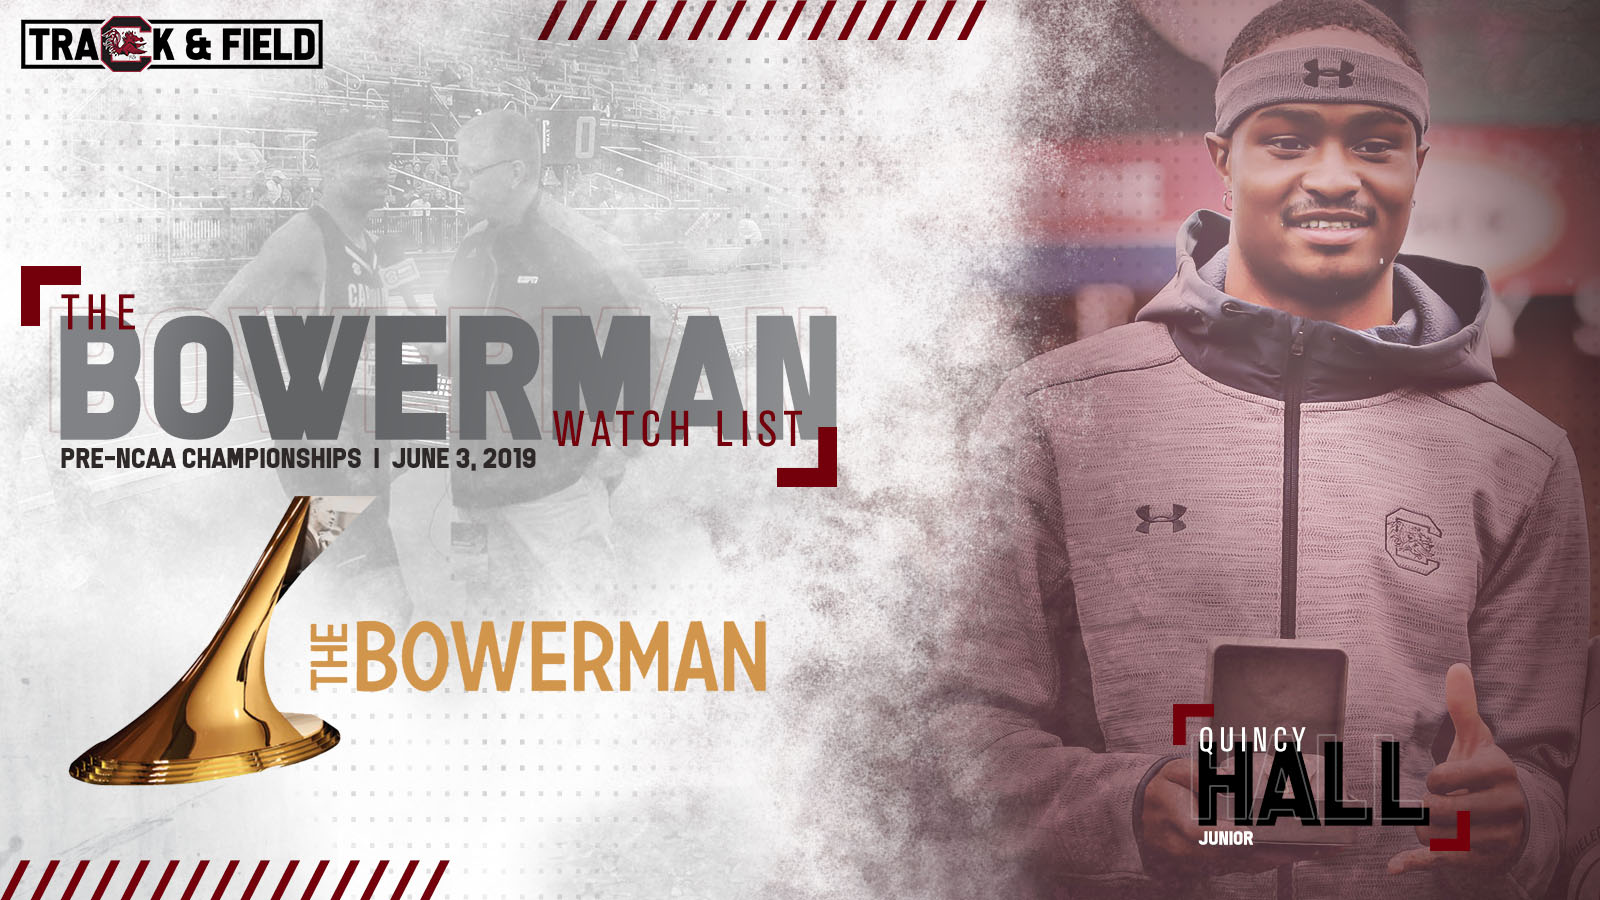 Hall Named to The Bowerman Watch List